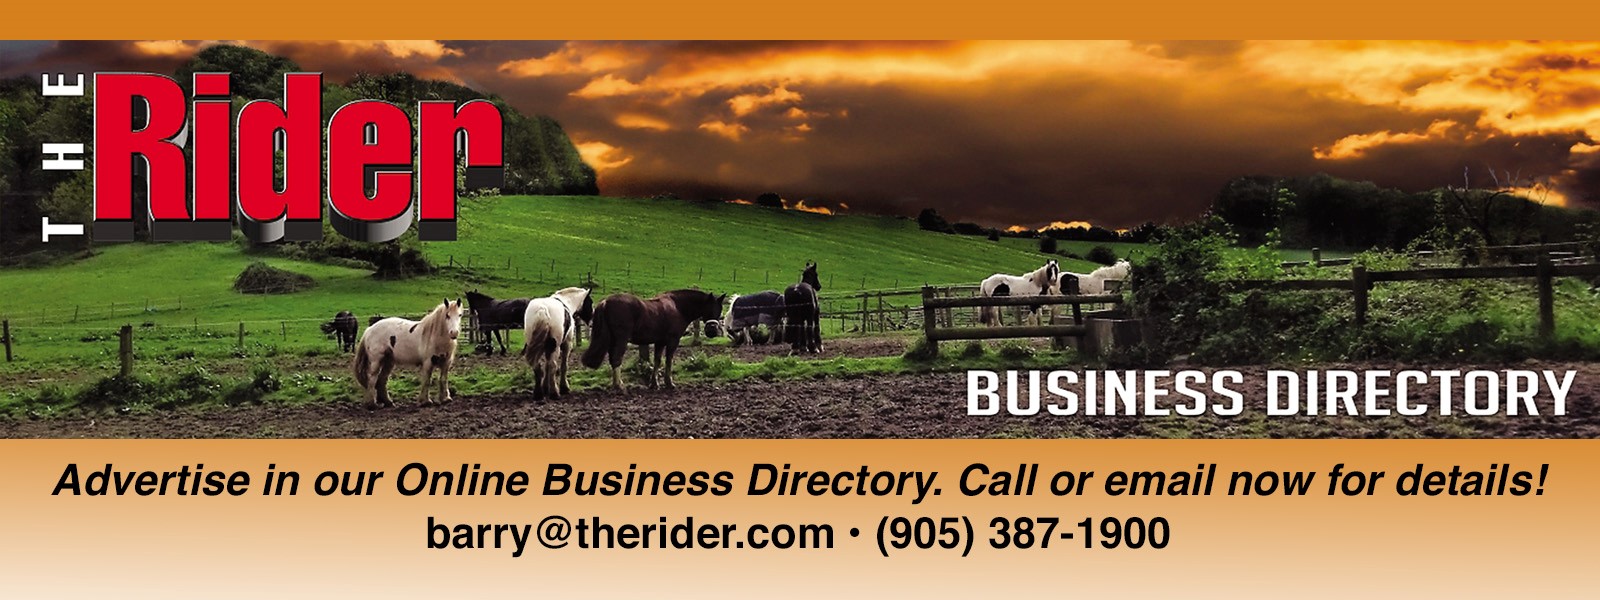 Advertise in The Rider Business Directory